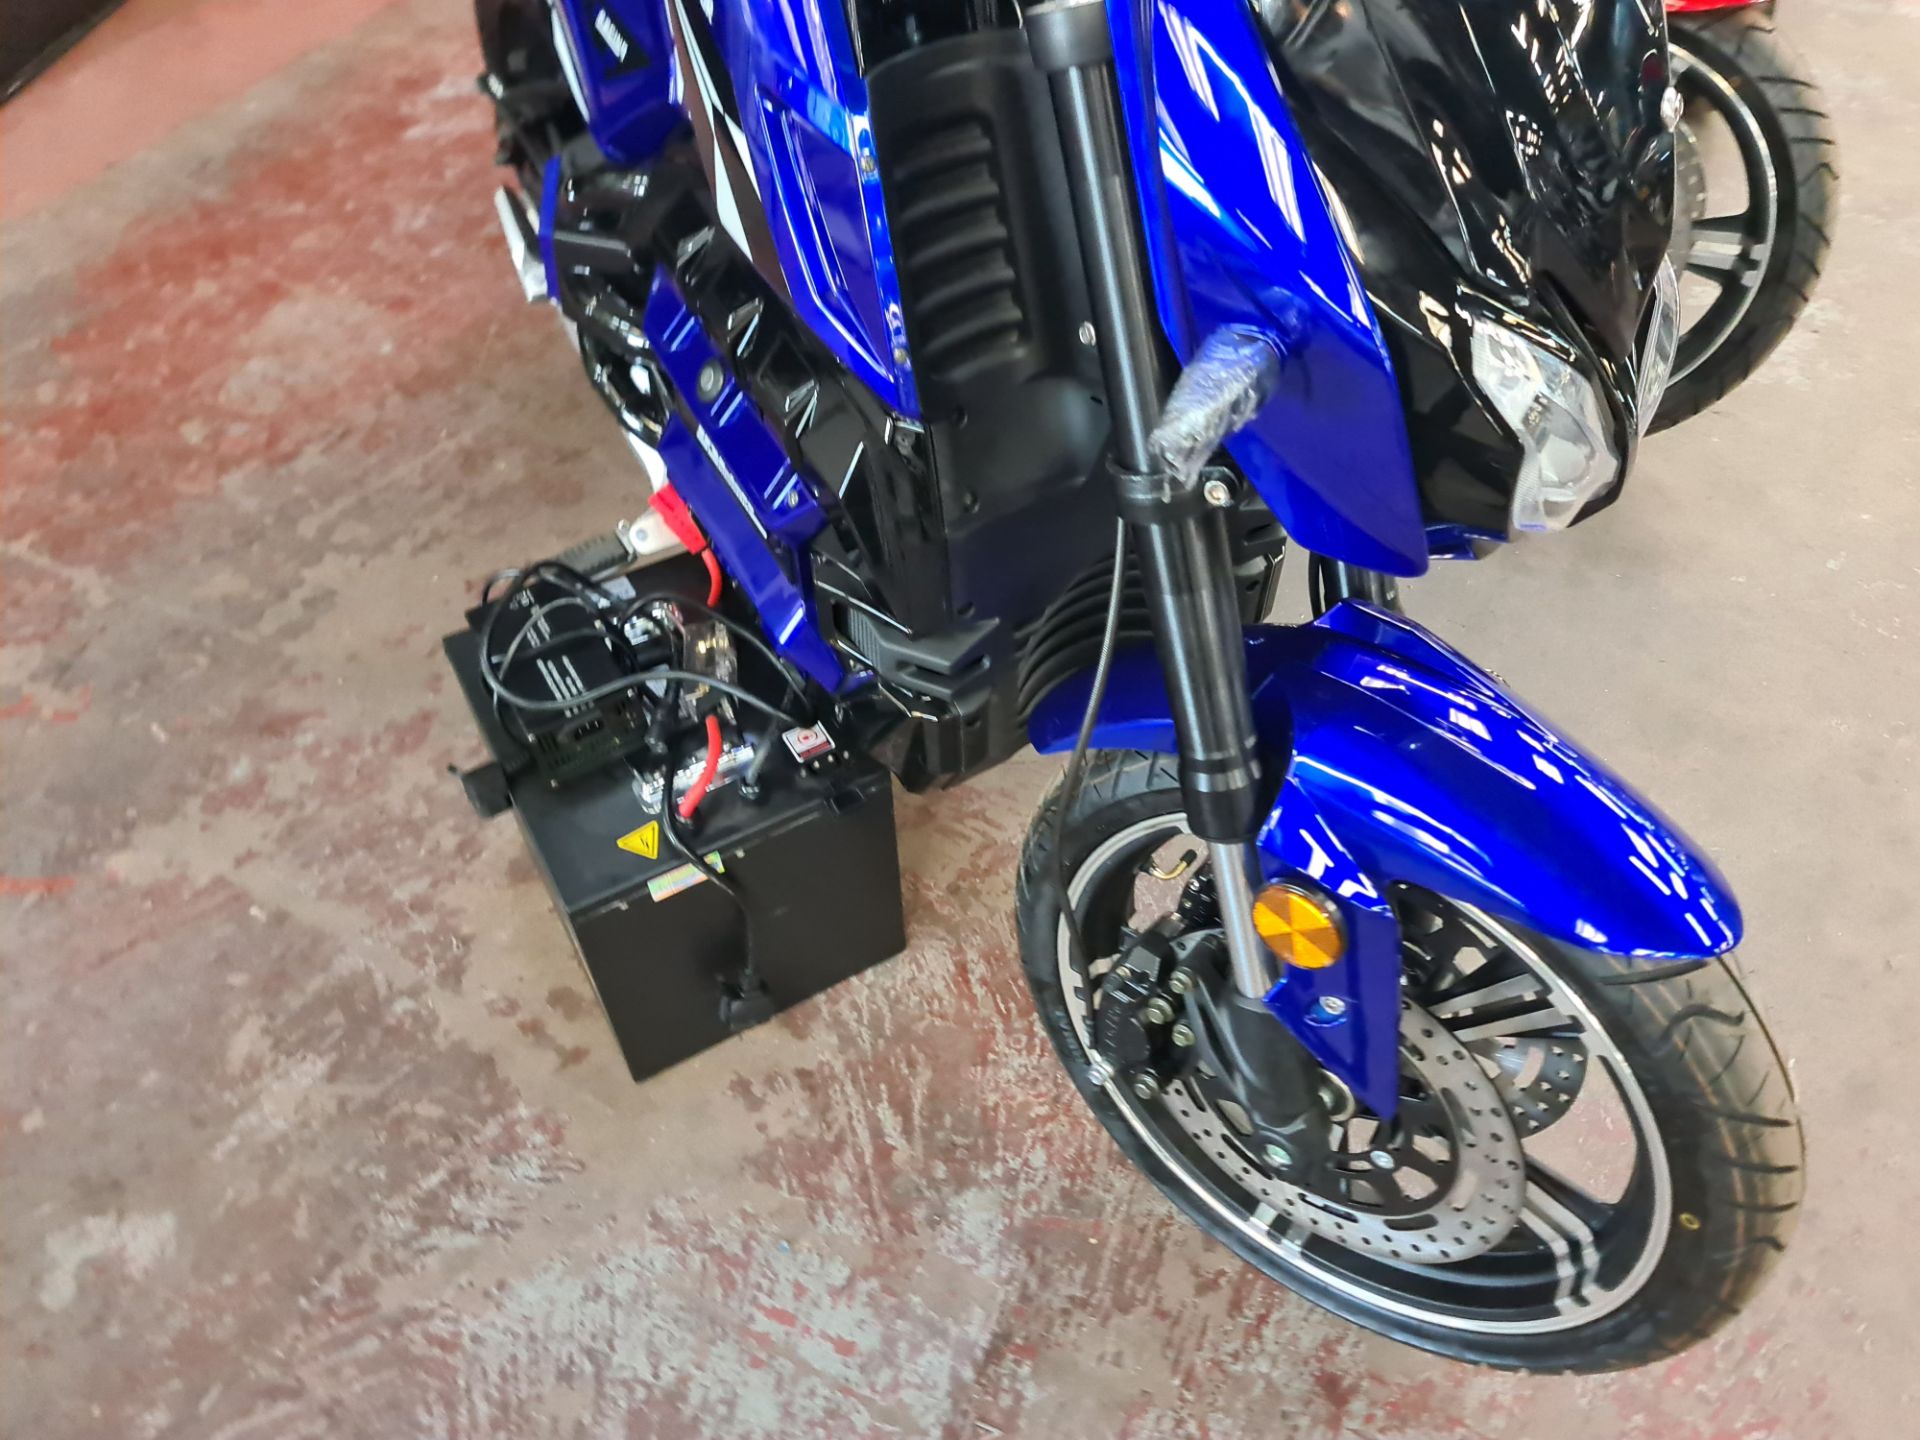 Farsta 6000 electric motorbike, Non-runner. Colour: blue, 125cc equivalent, 63mph top speed, 135 mil - Image 6 of 26